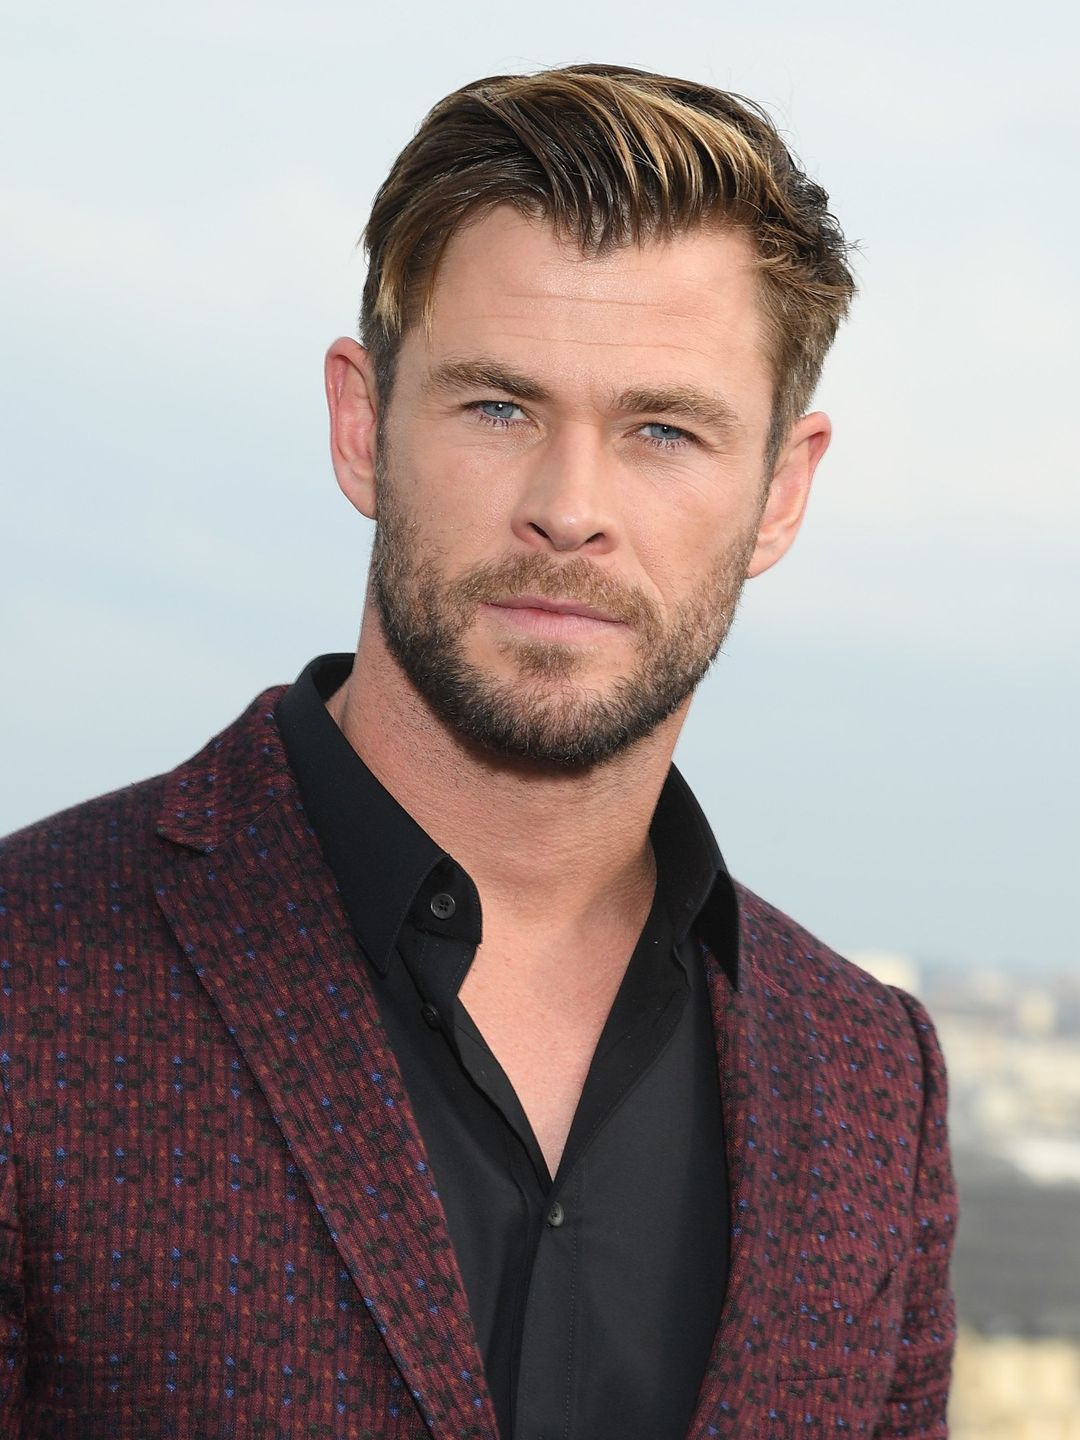 Chris Hemsworth who is his father